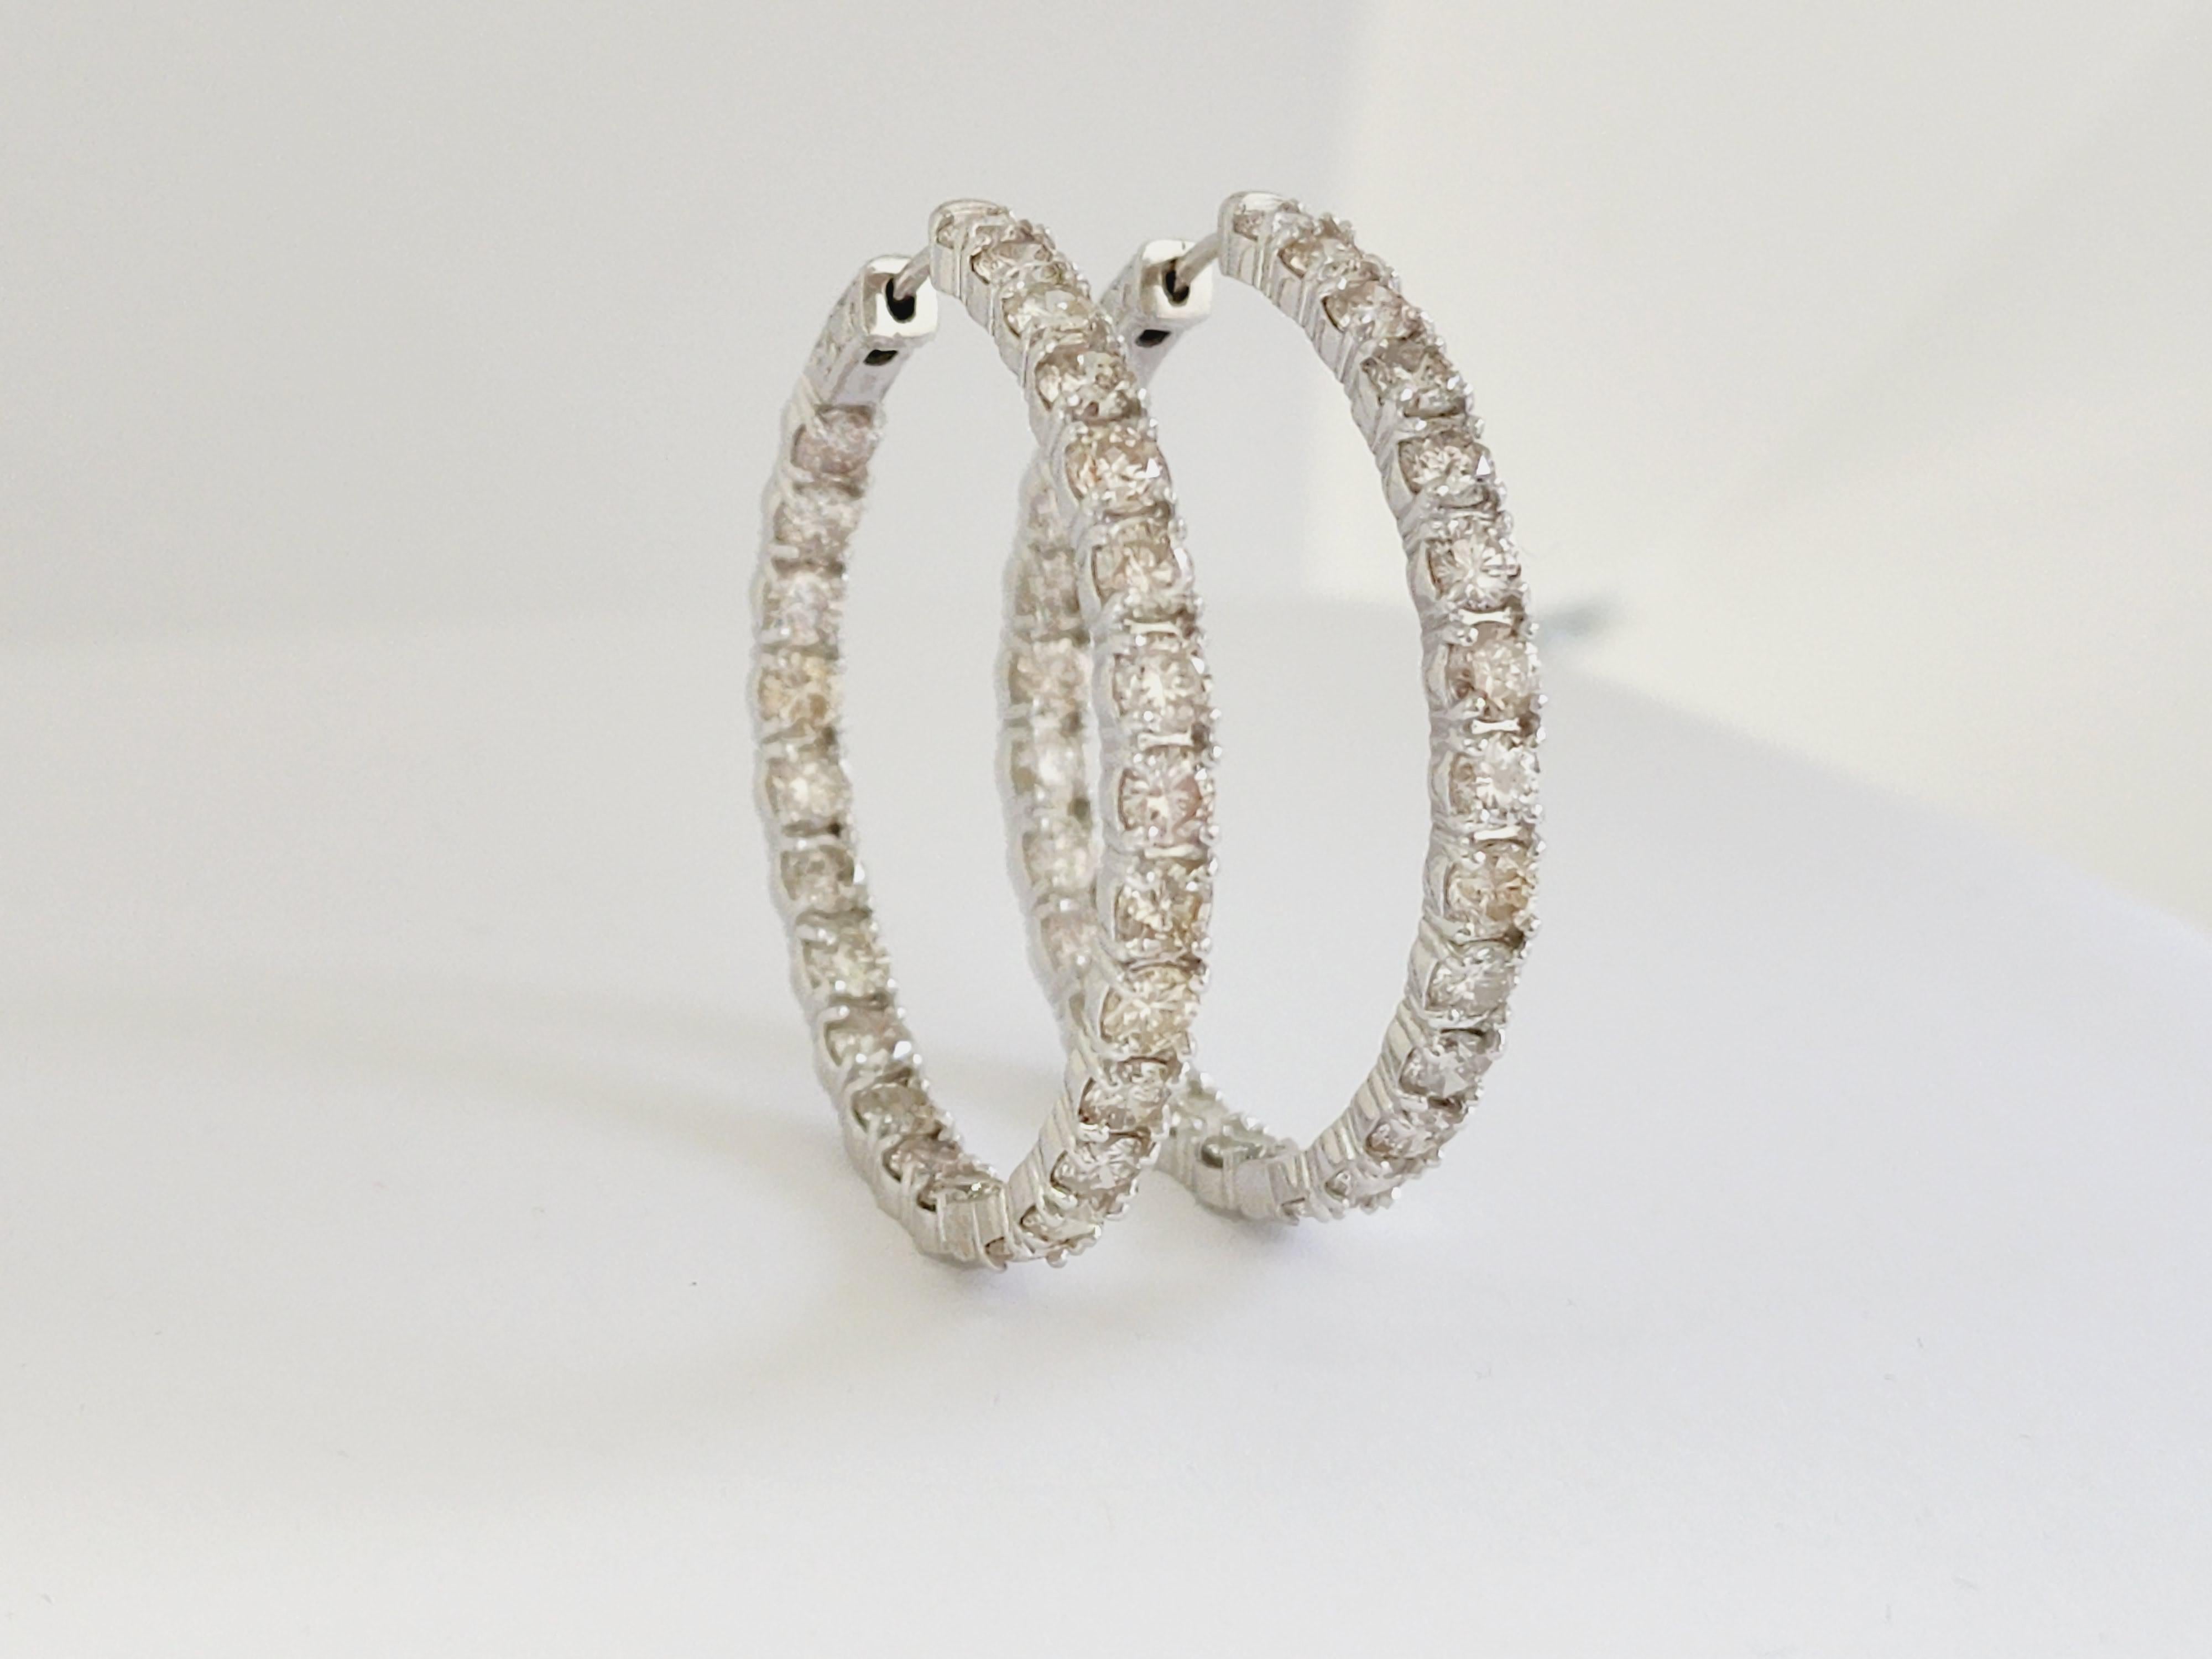 Beautiful pair of natural diamond inside out hoop earrings in 14k white gold. Secures with push snap closure. Very shiny and clean, average J-K, Color, SI Clarity,  Perfect for the everyday wear! Measures 1.50 inch diameter.